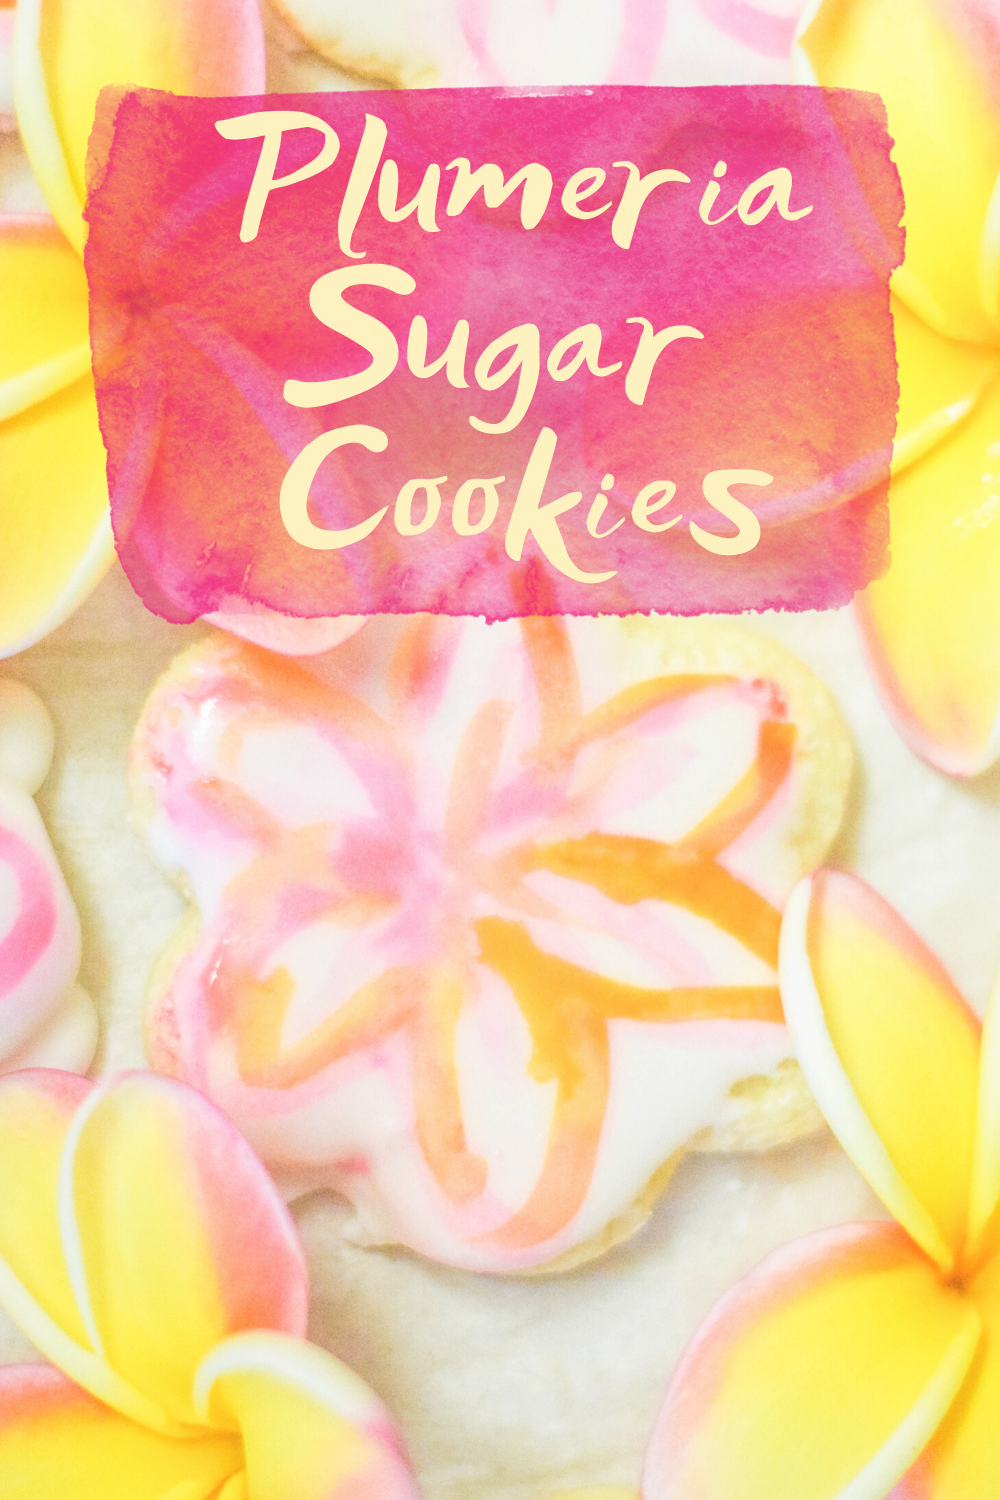 Plumeria Painted Cookies - Looking for an easy tutorial for painted cookies? Check out these delicious plumeria painted sugar cookies! |  Painted Cookies - Hand Painted Sugar Cookies - How To Paint Sugar Cookies With Food Coloring 